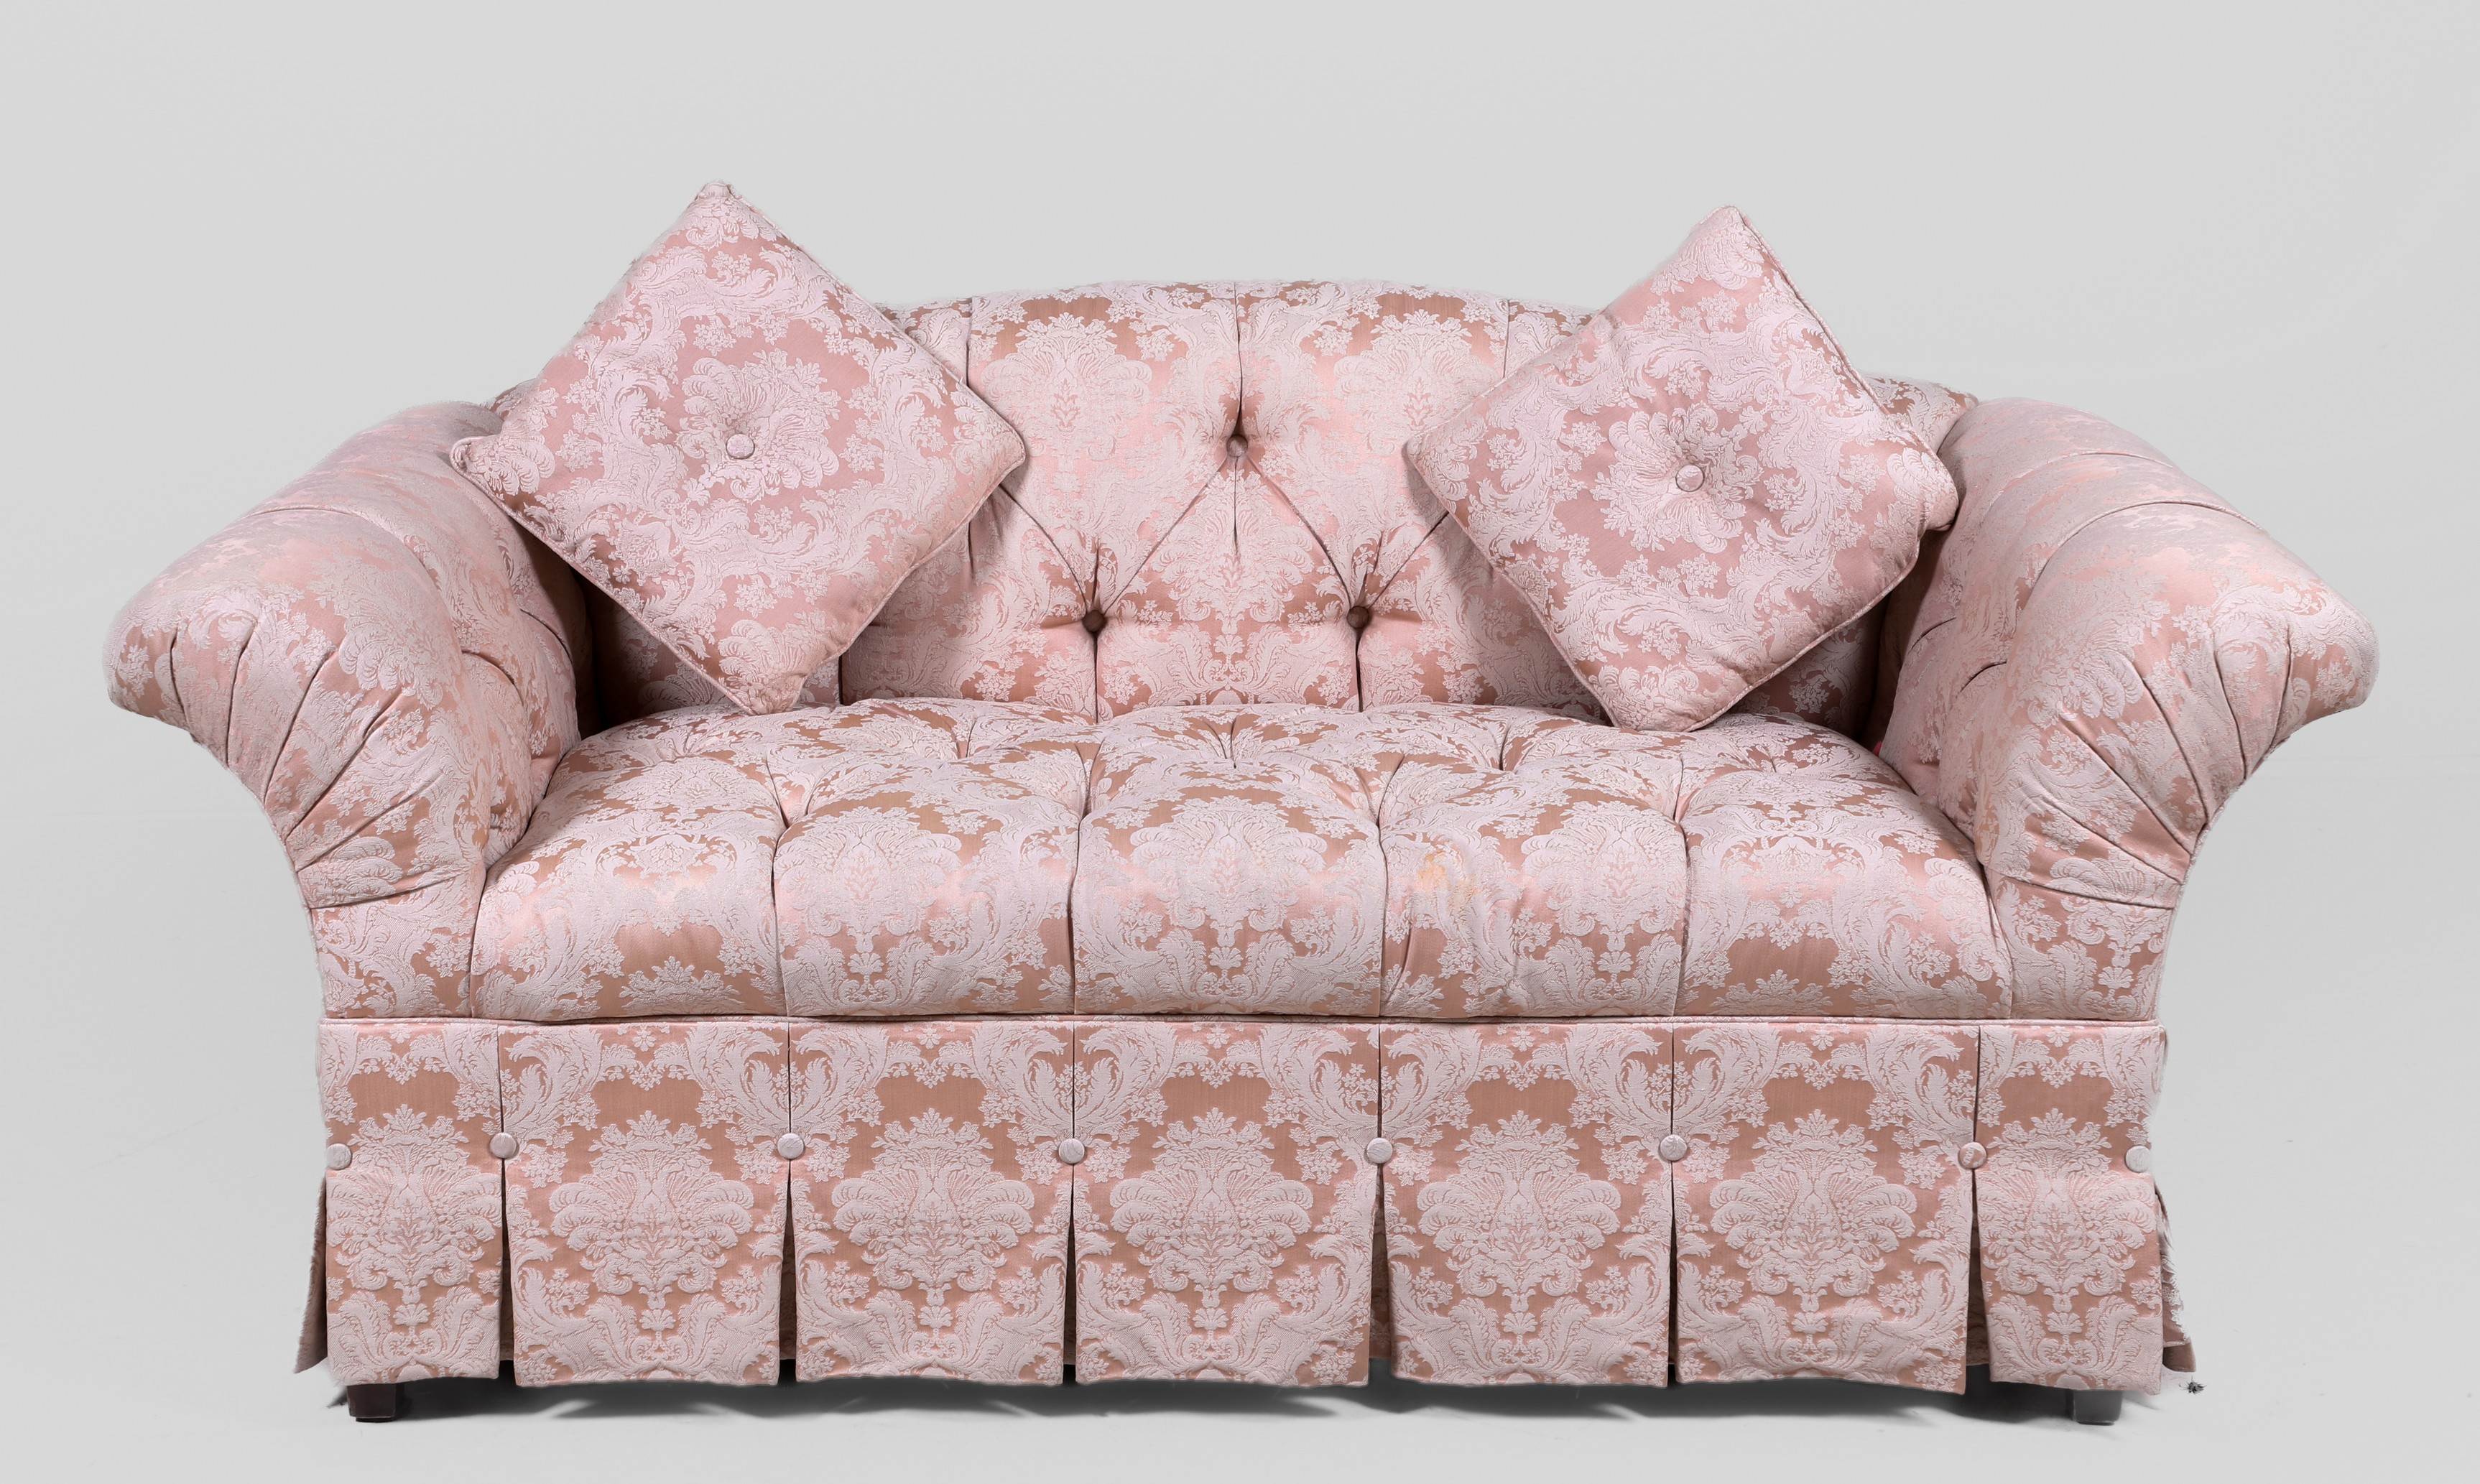 Tufted upholstered sofa pink and 3b6836